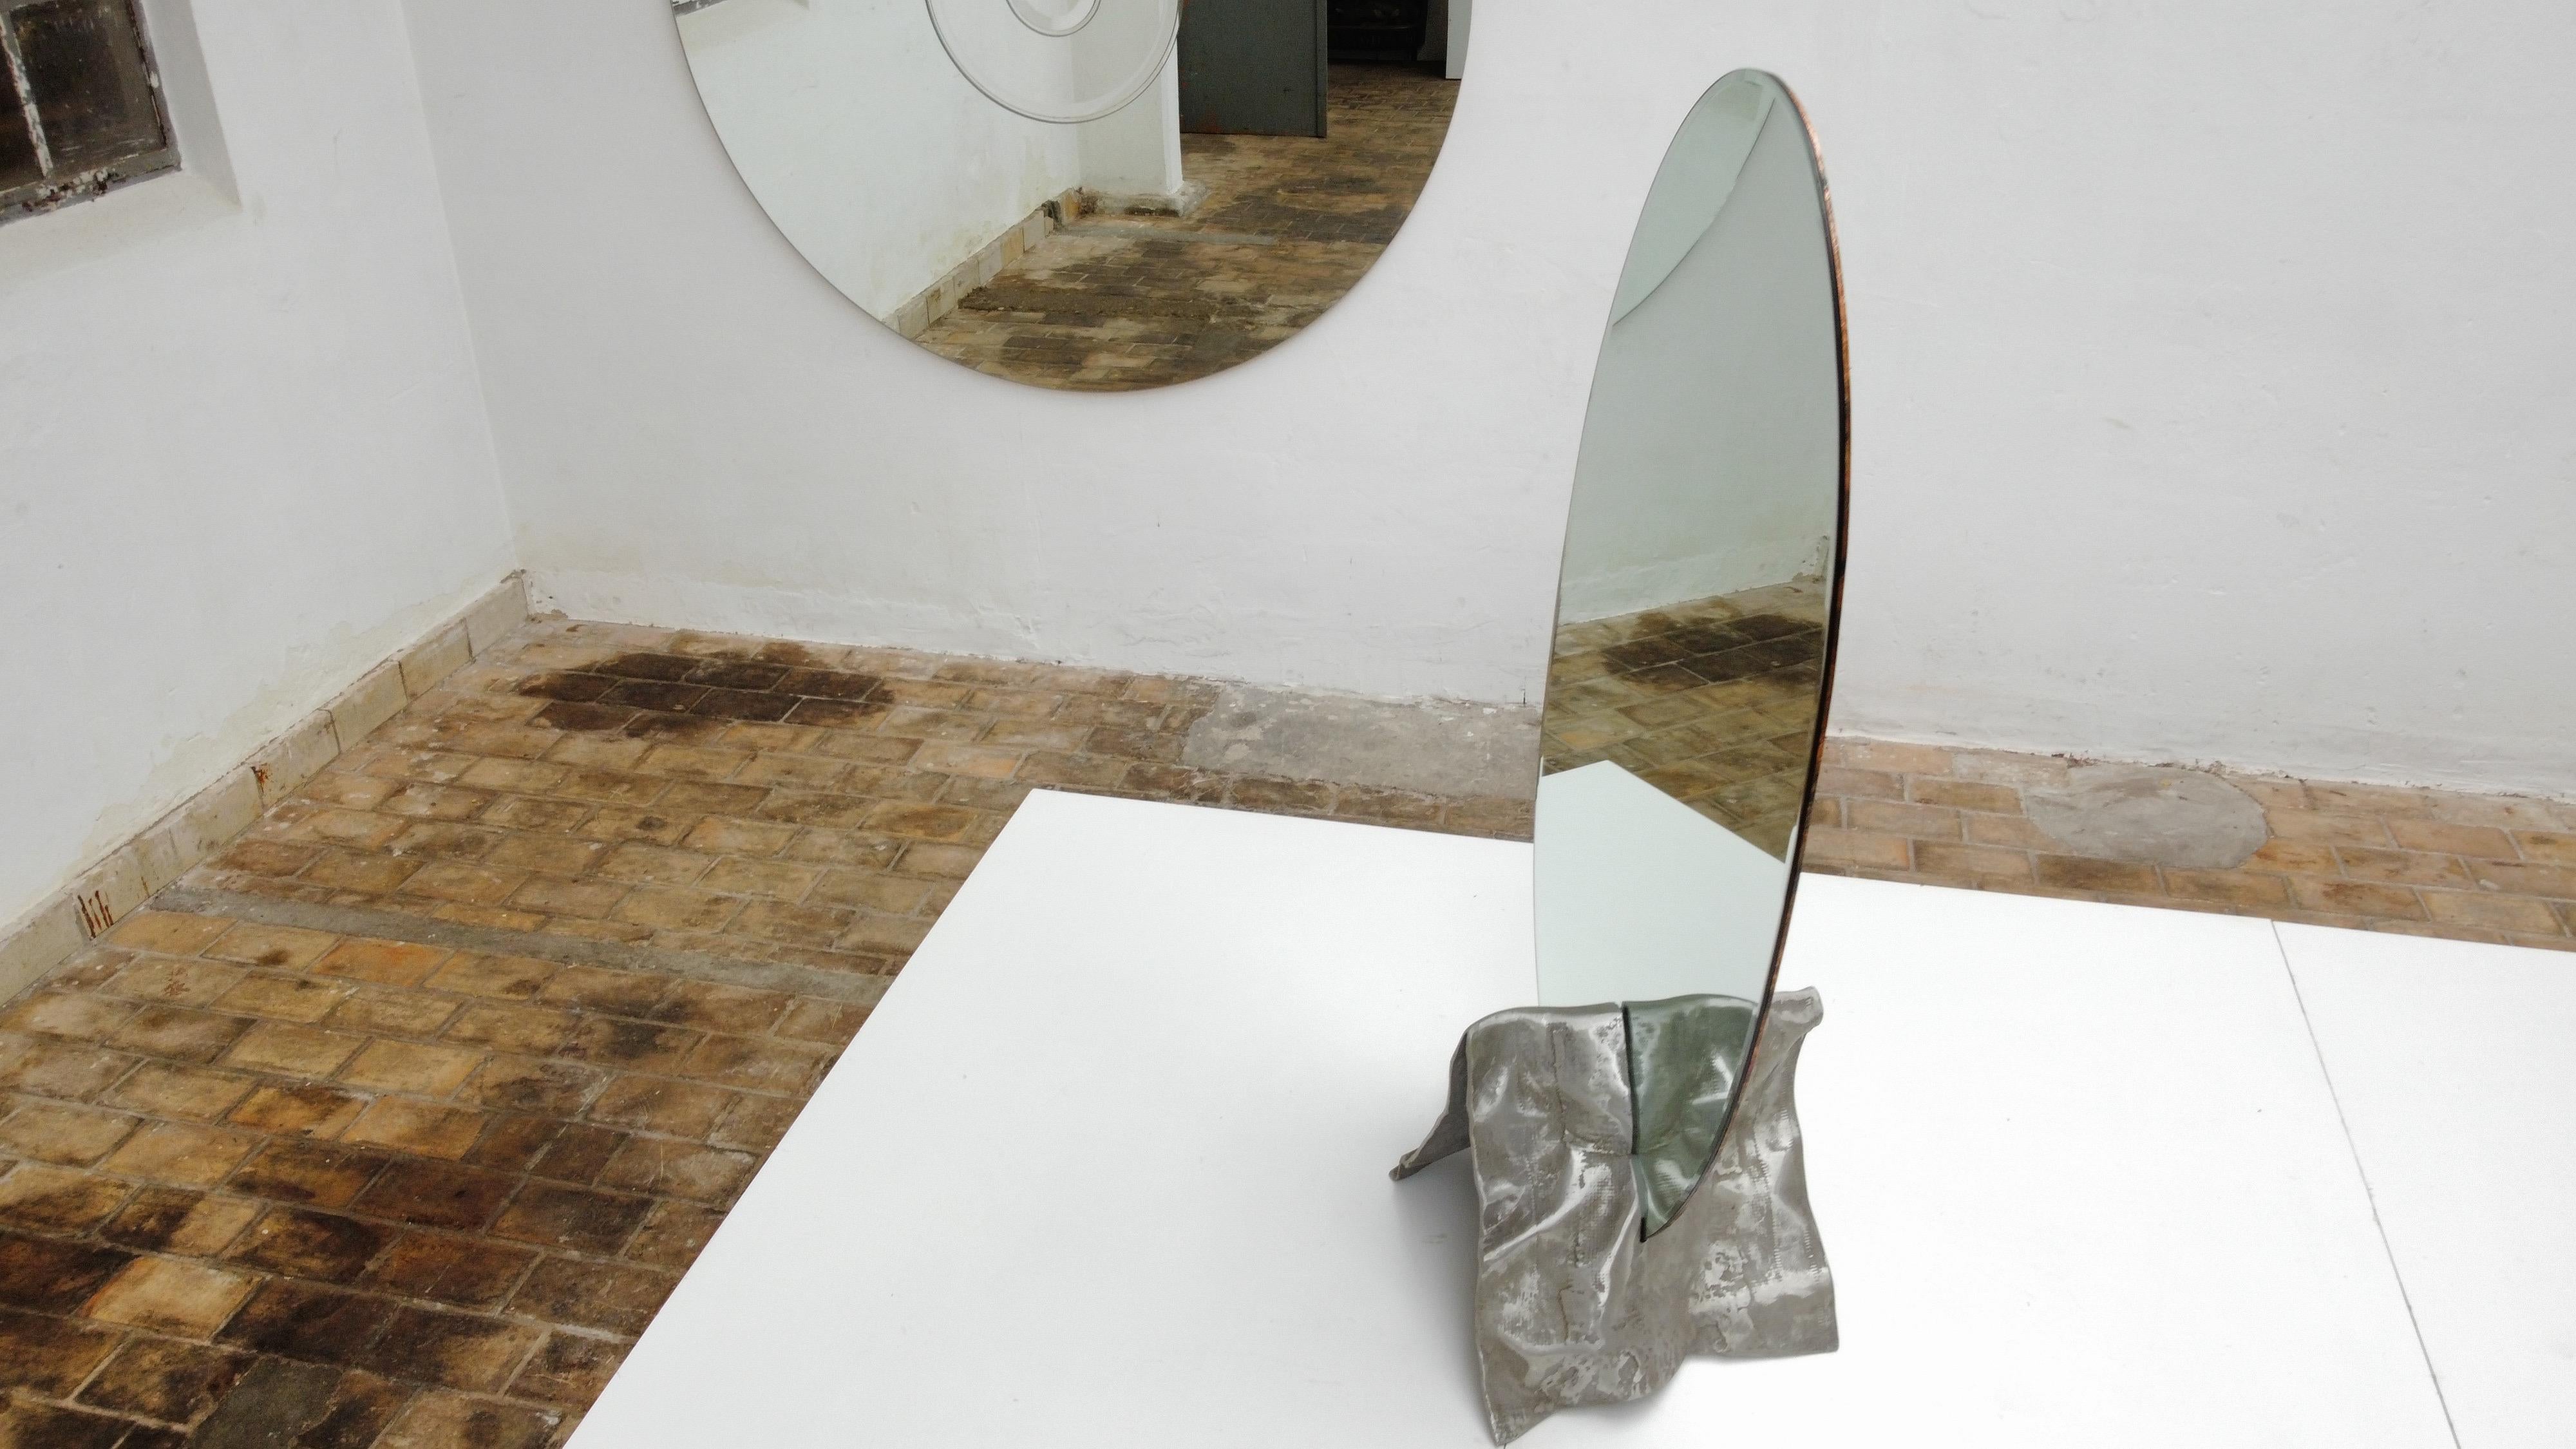 Dressing Mirror by Burchiellaro with Sculptural Form Cast Aluminum Base, 1970 For Sale 5